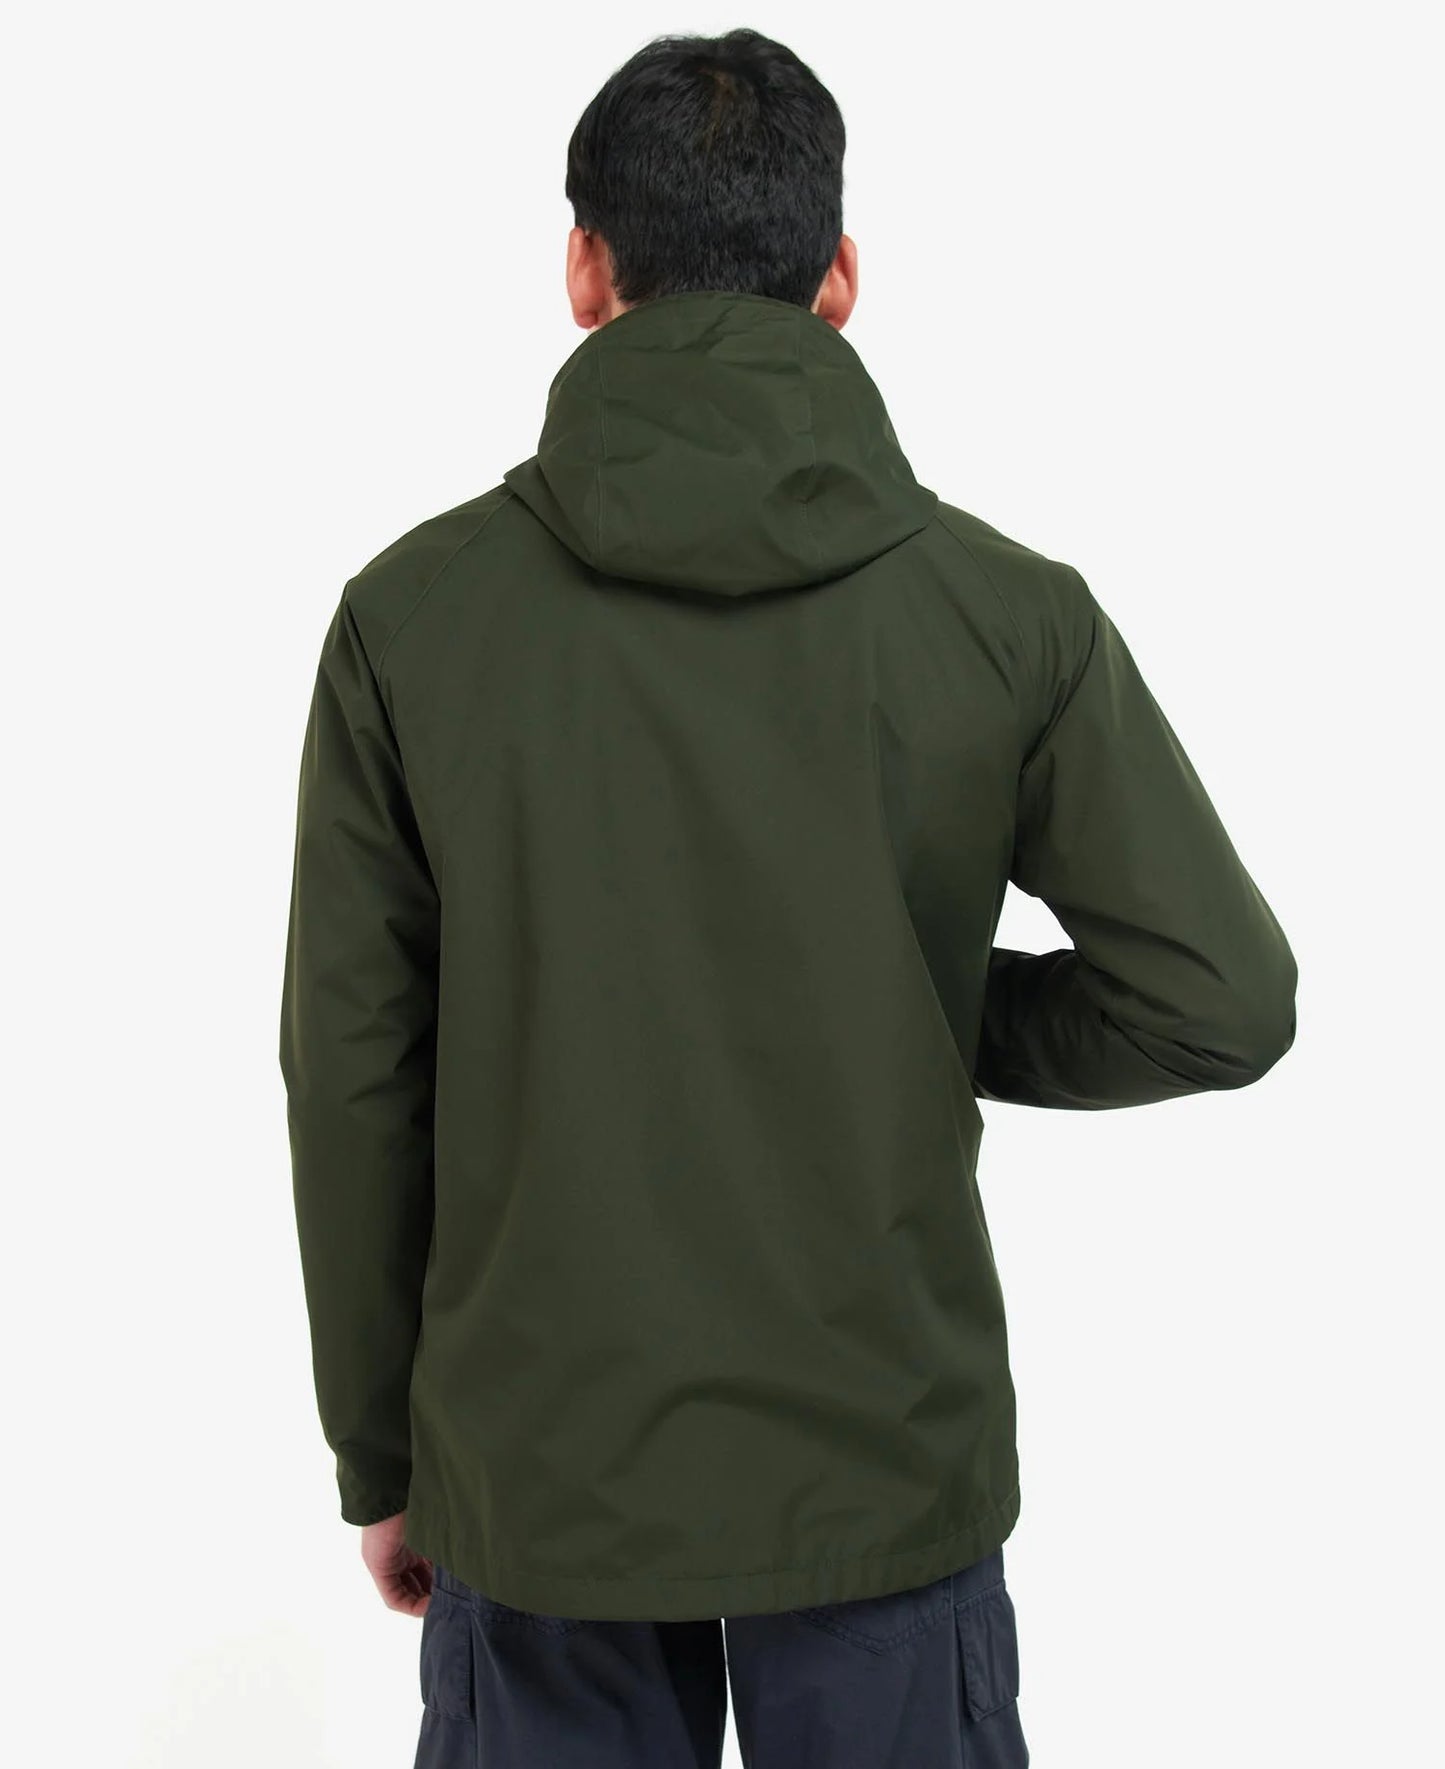 Back view of the green Hooded Domus Jacket by Barbour